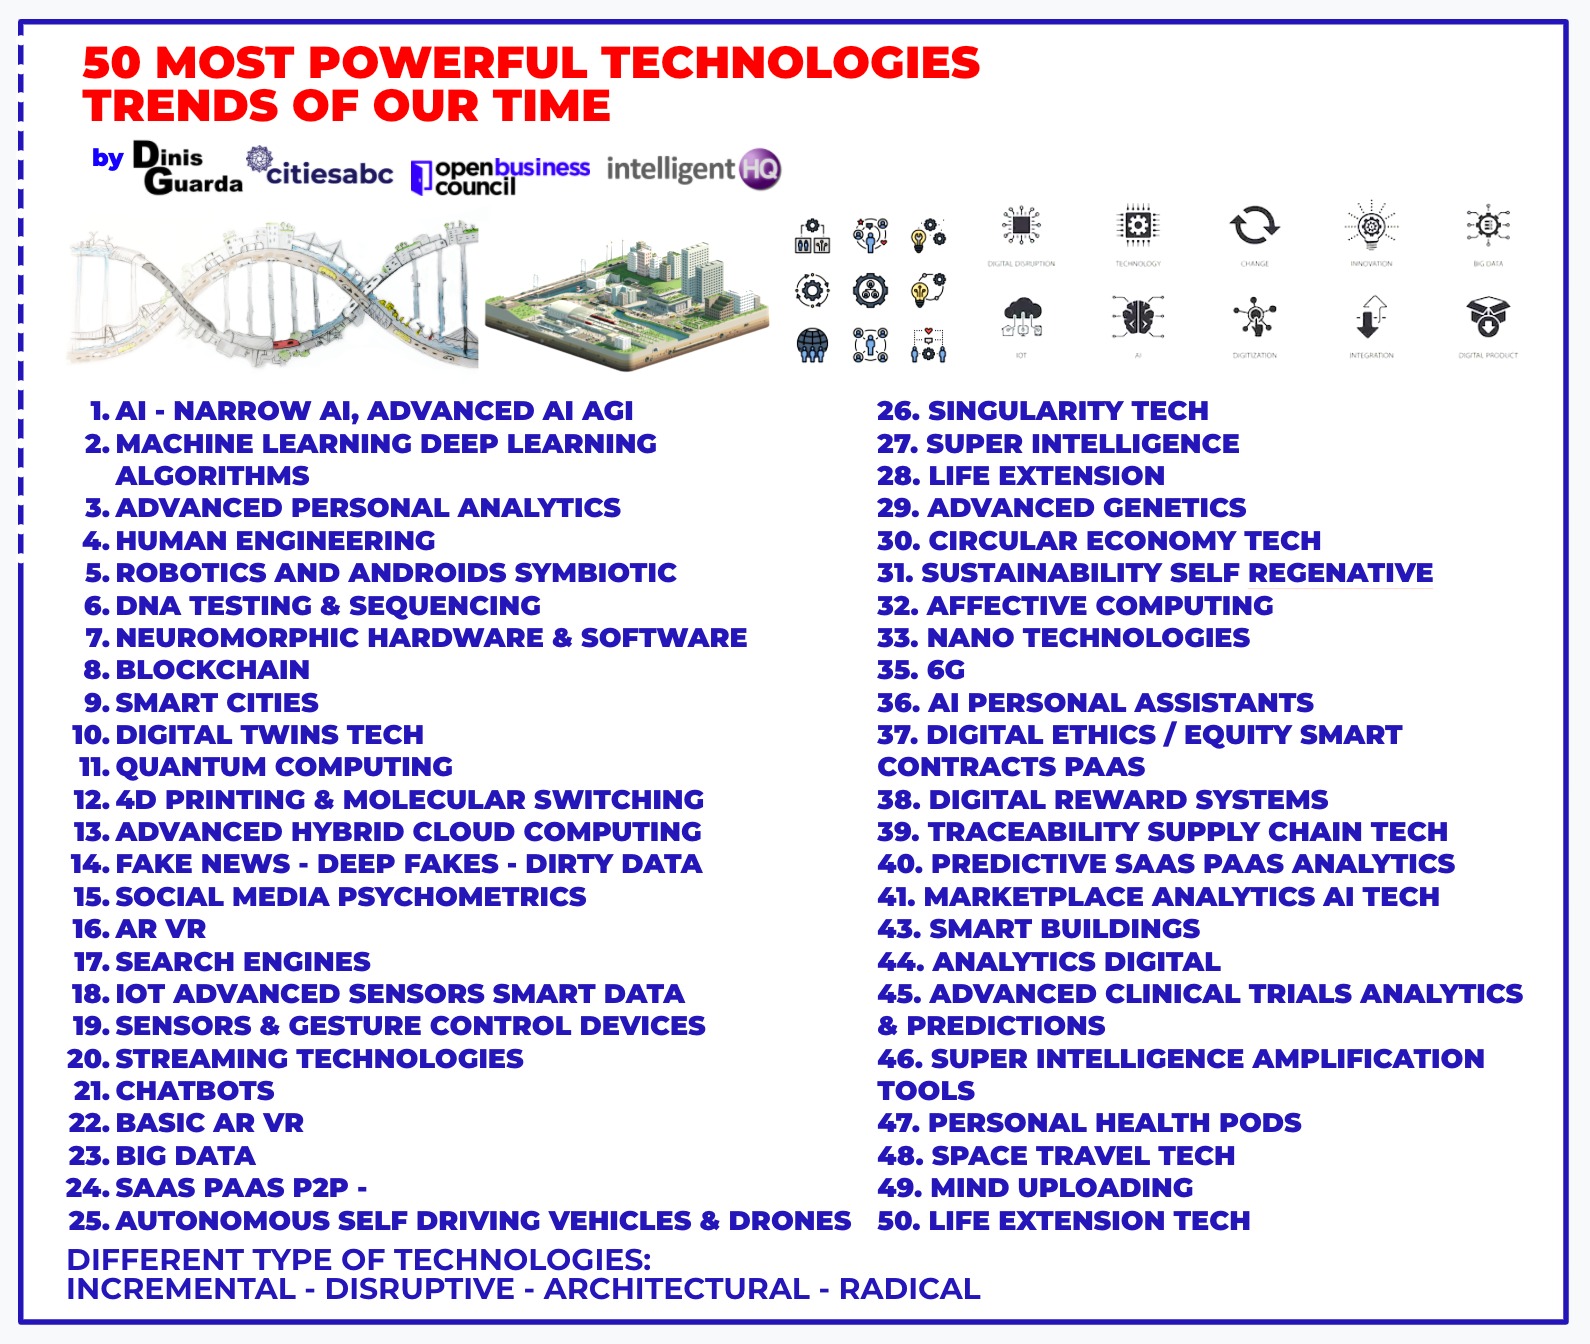 50 Most Powerful Technologies Trends of our Society 5.0 Time